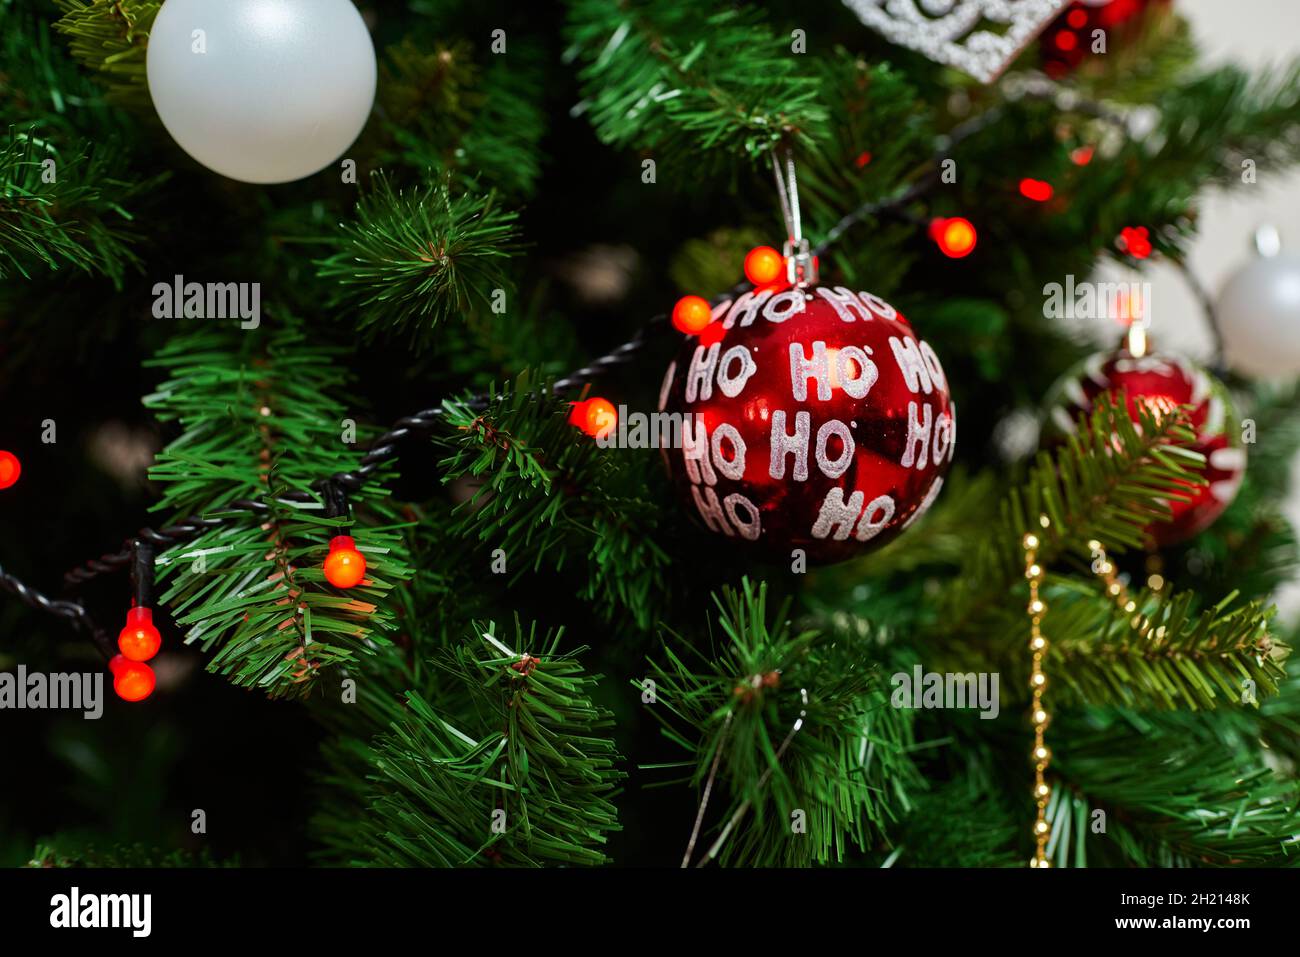 Traditional artificial Christmas tree with red ball ornament with glowing lights Stock Photo